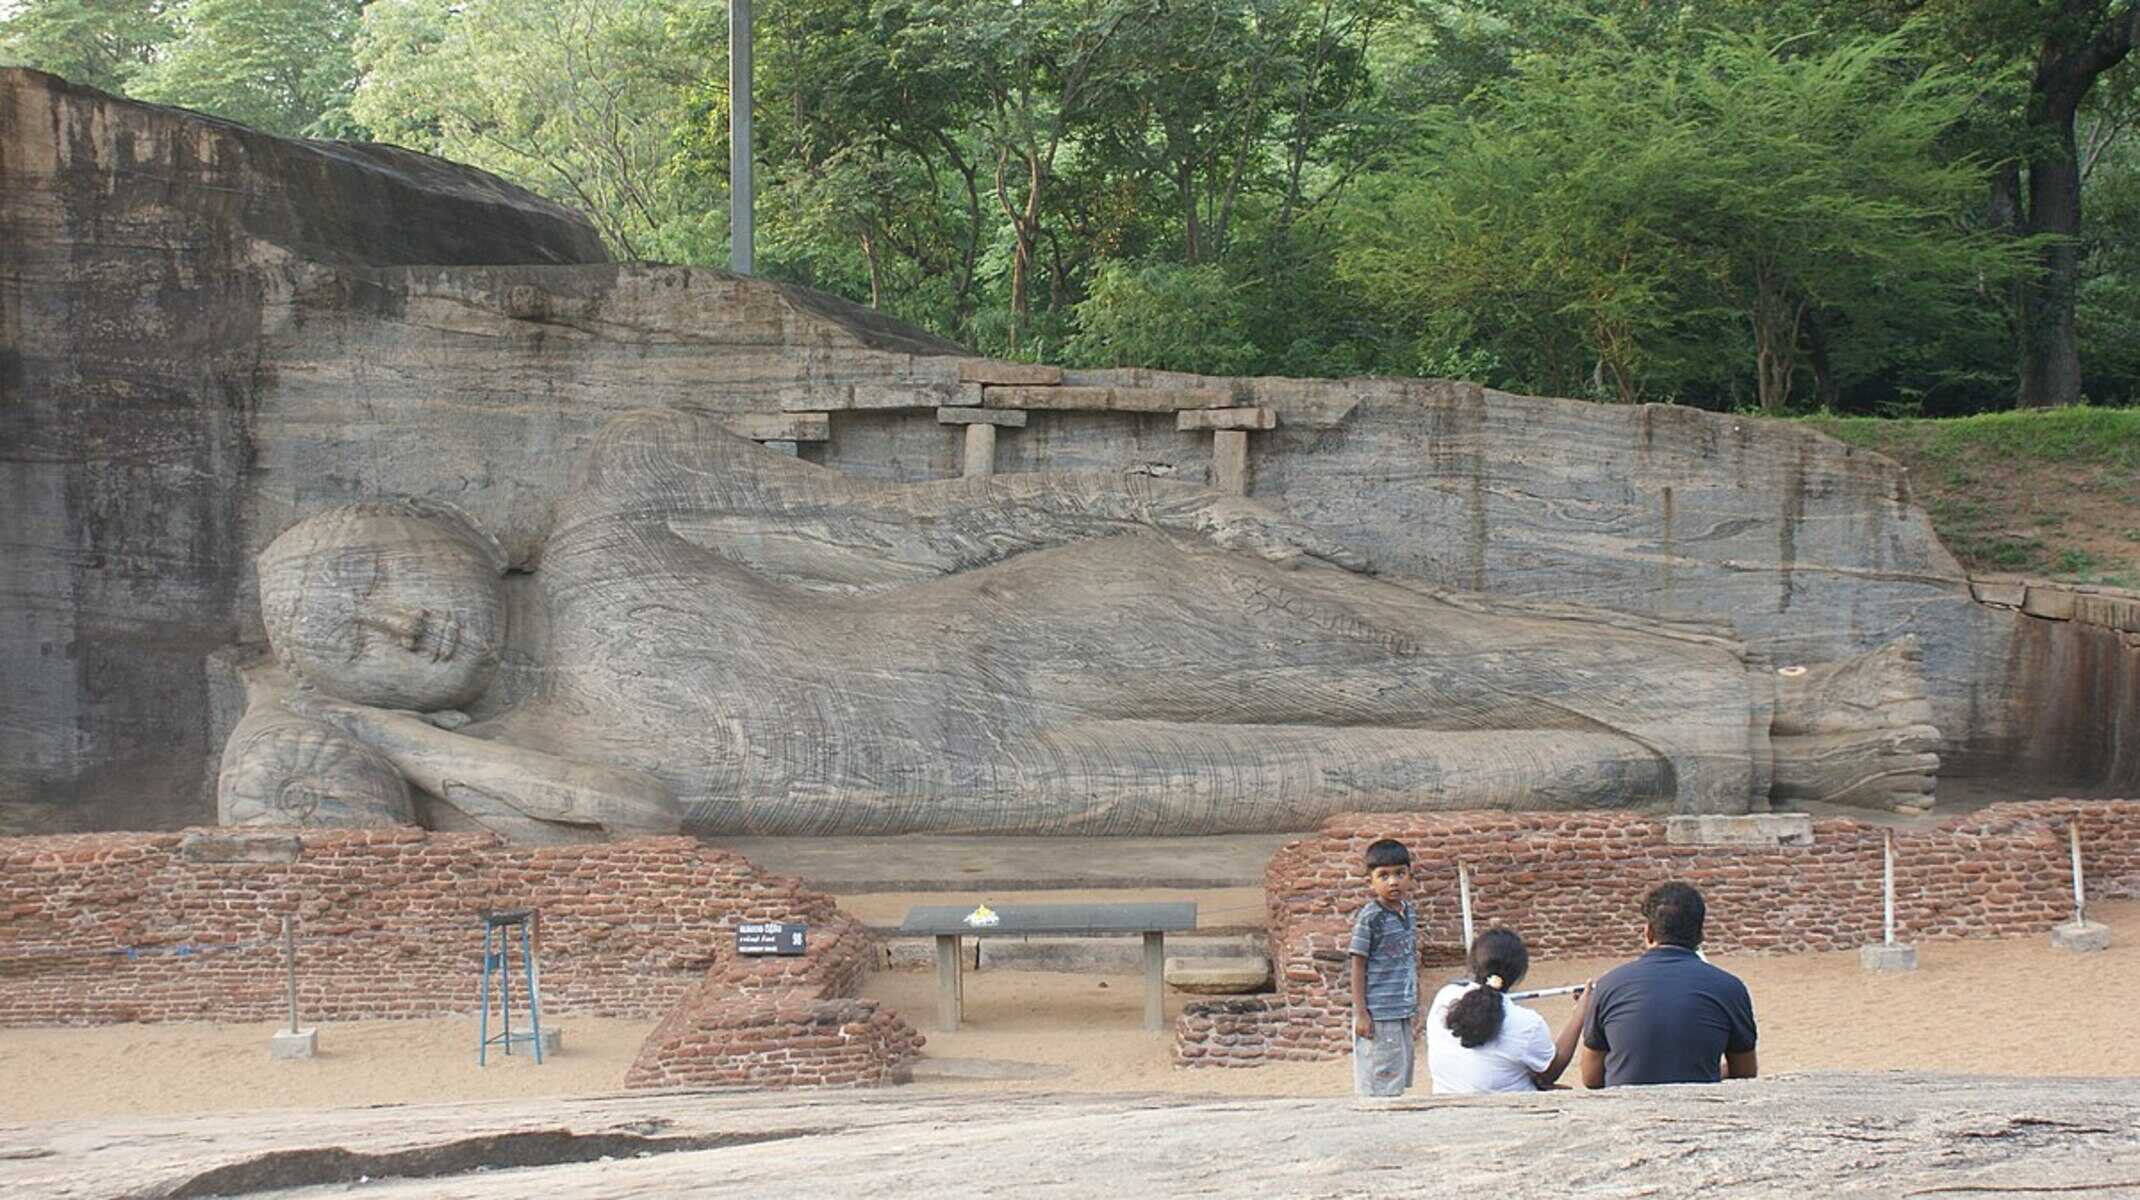 what-helped-preserve-the-colossal-sculpture-parinirvana-of-the-buddha-at-gal-vihara